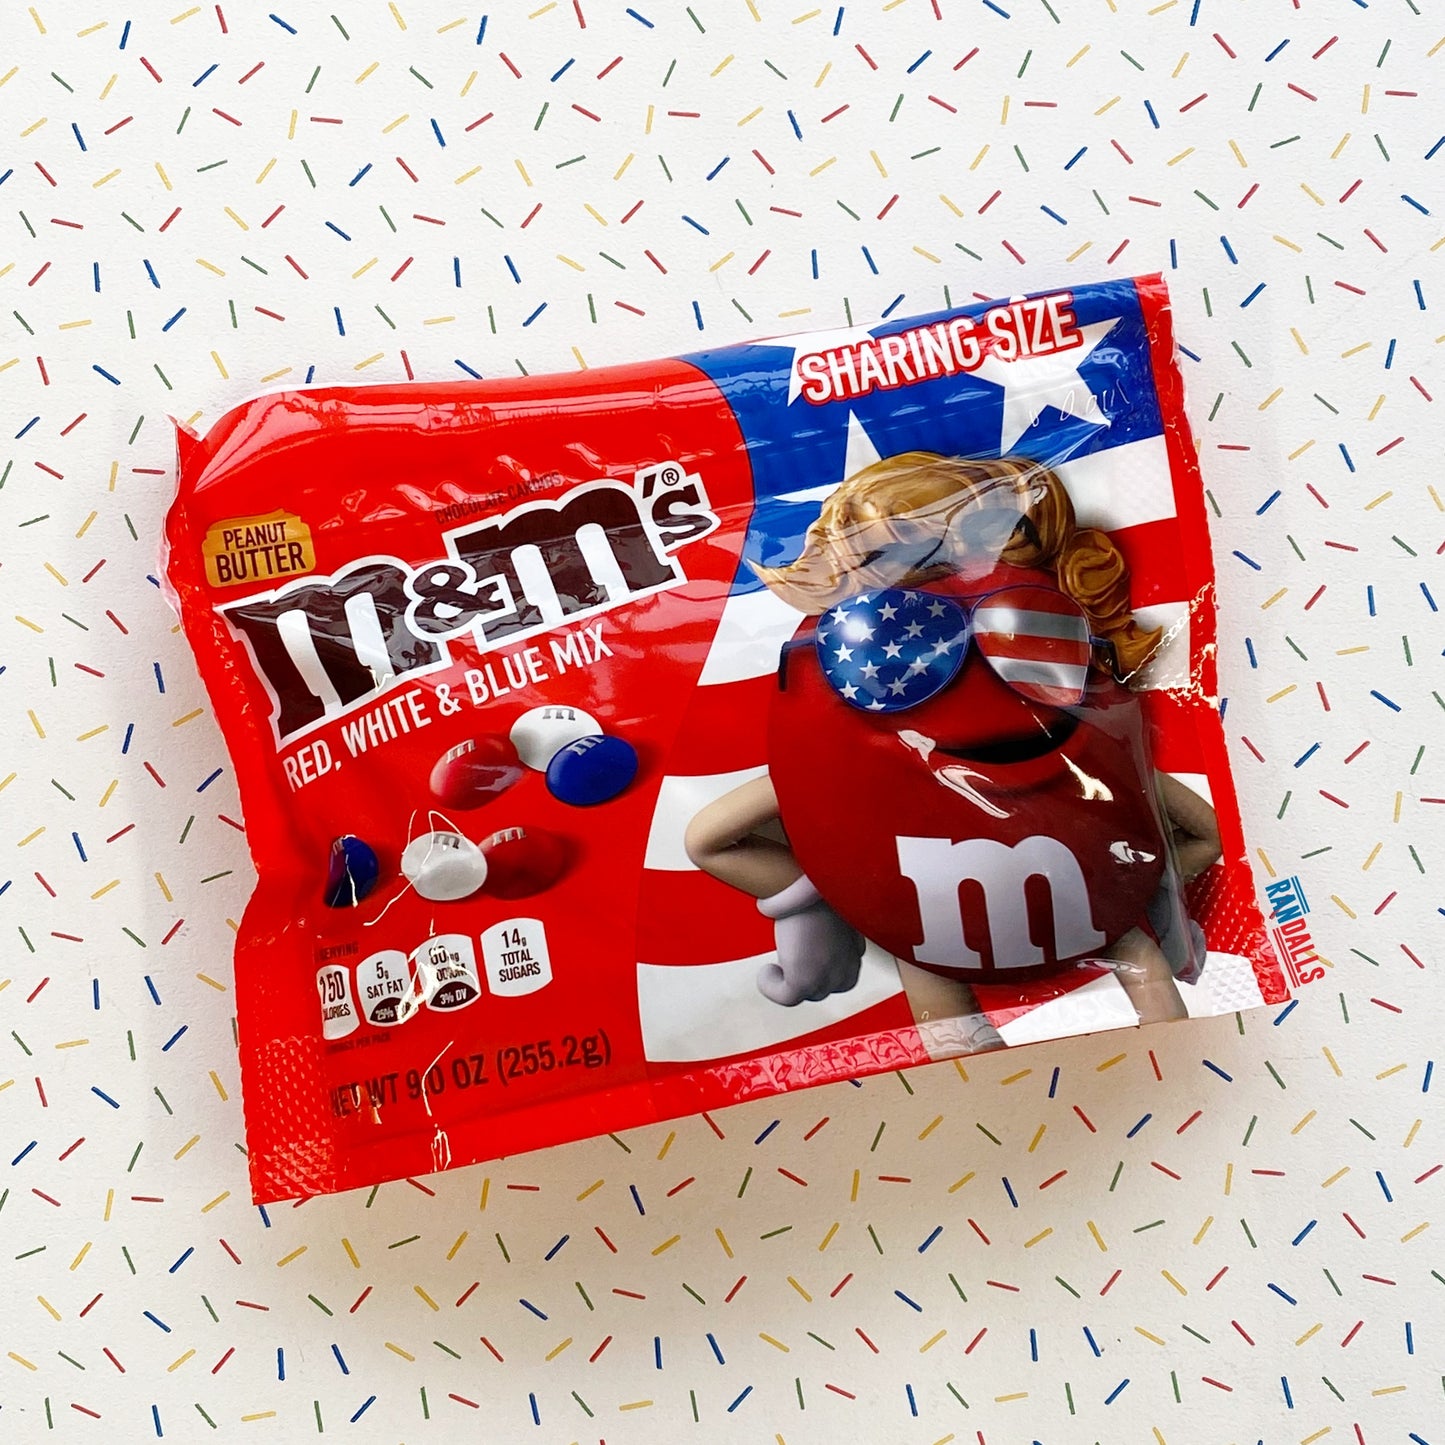 M&M's Peanut Butter, Red, White & Blue Mix, Share Size